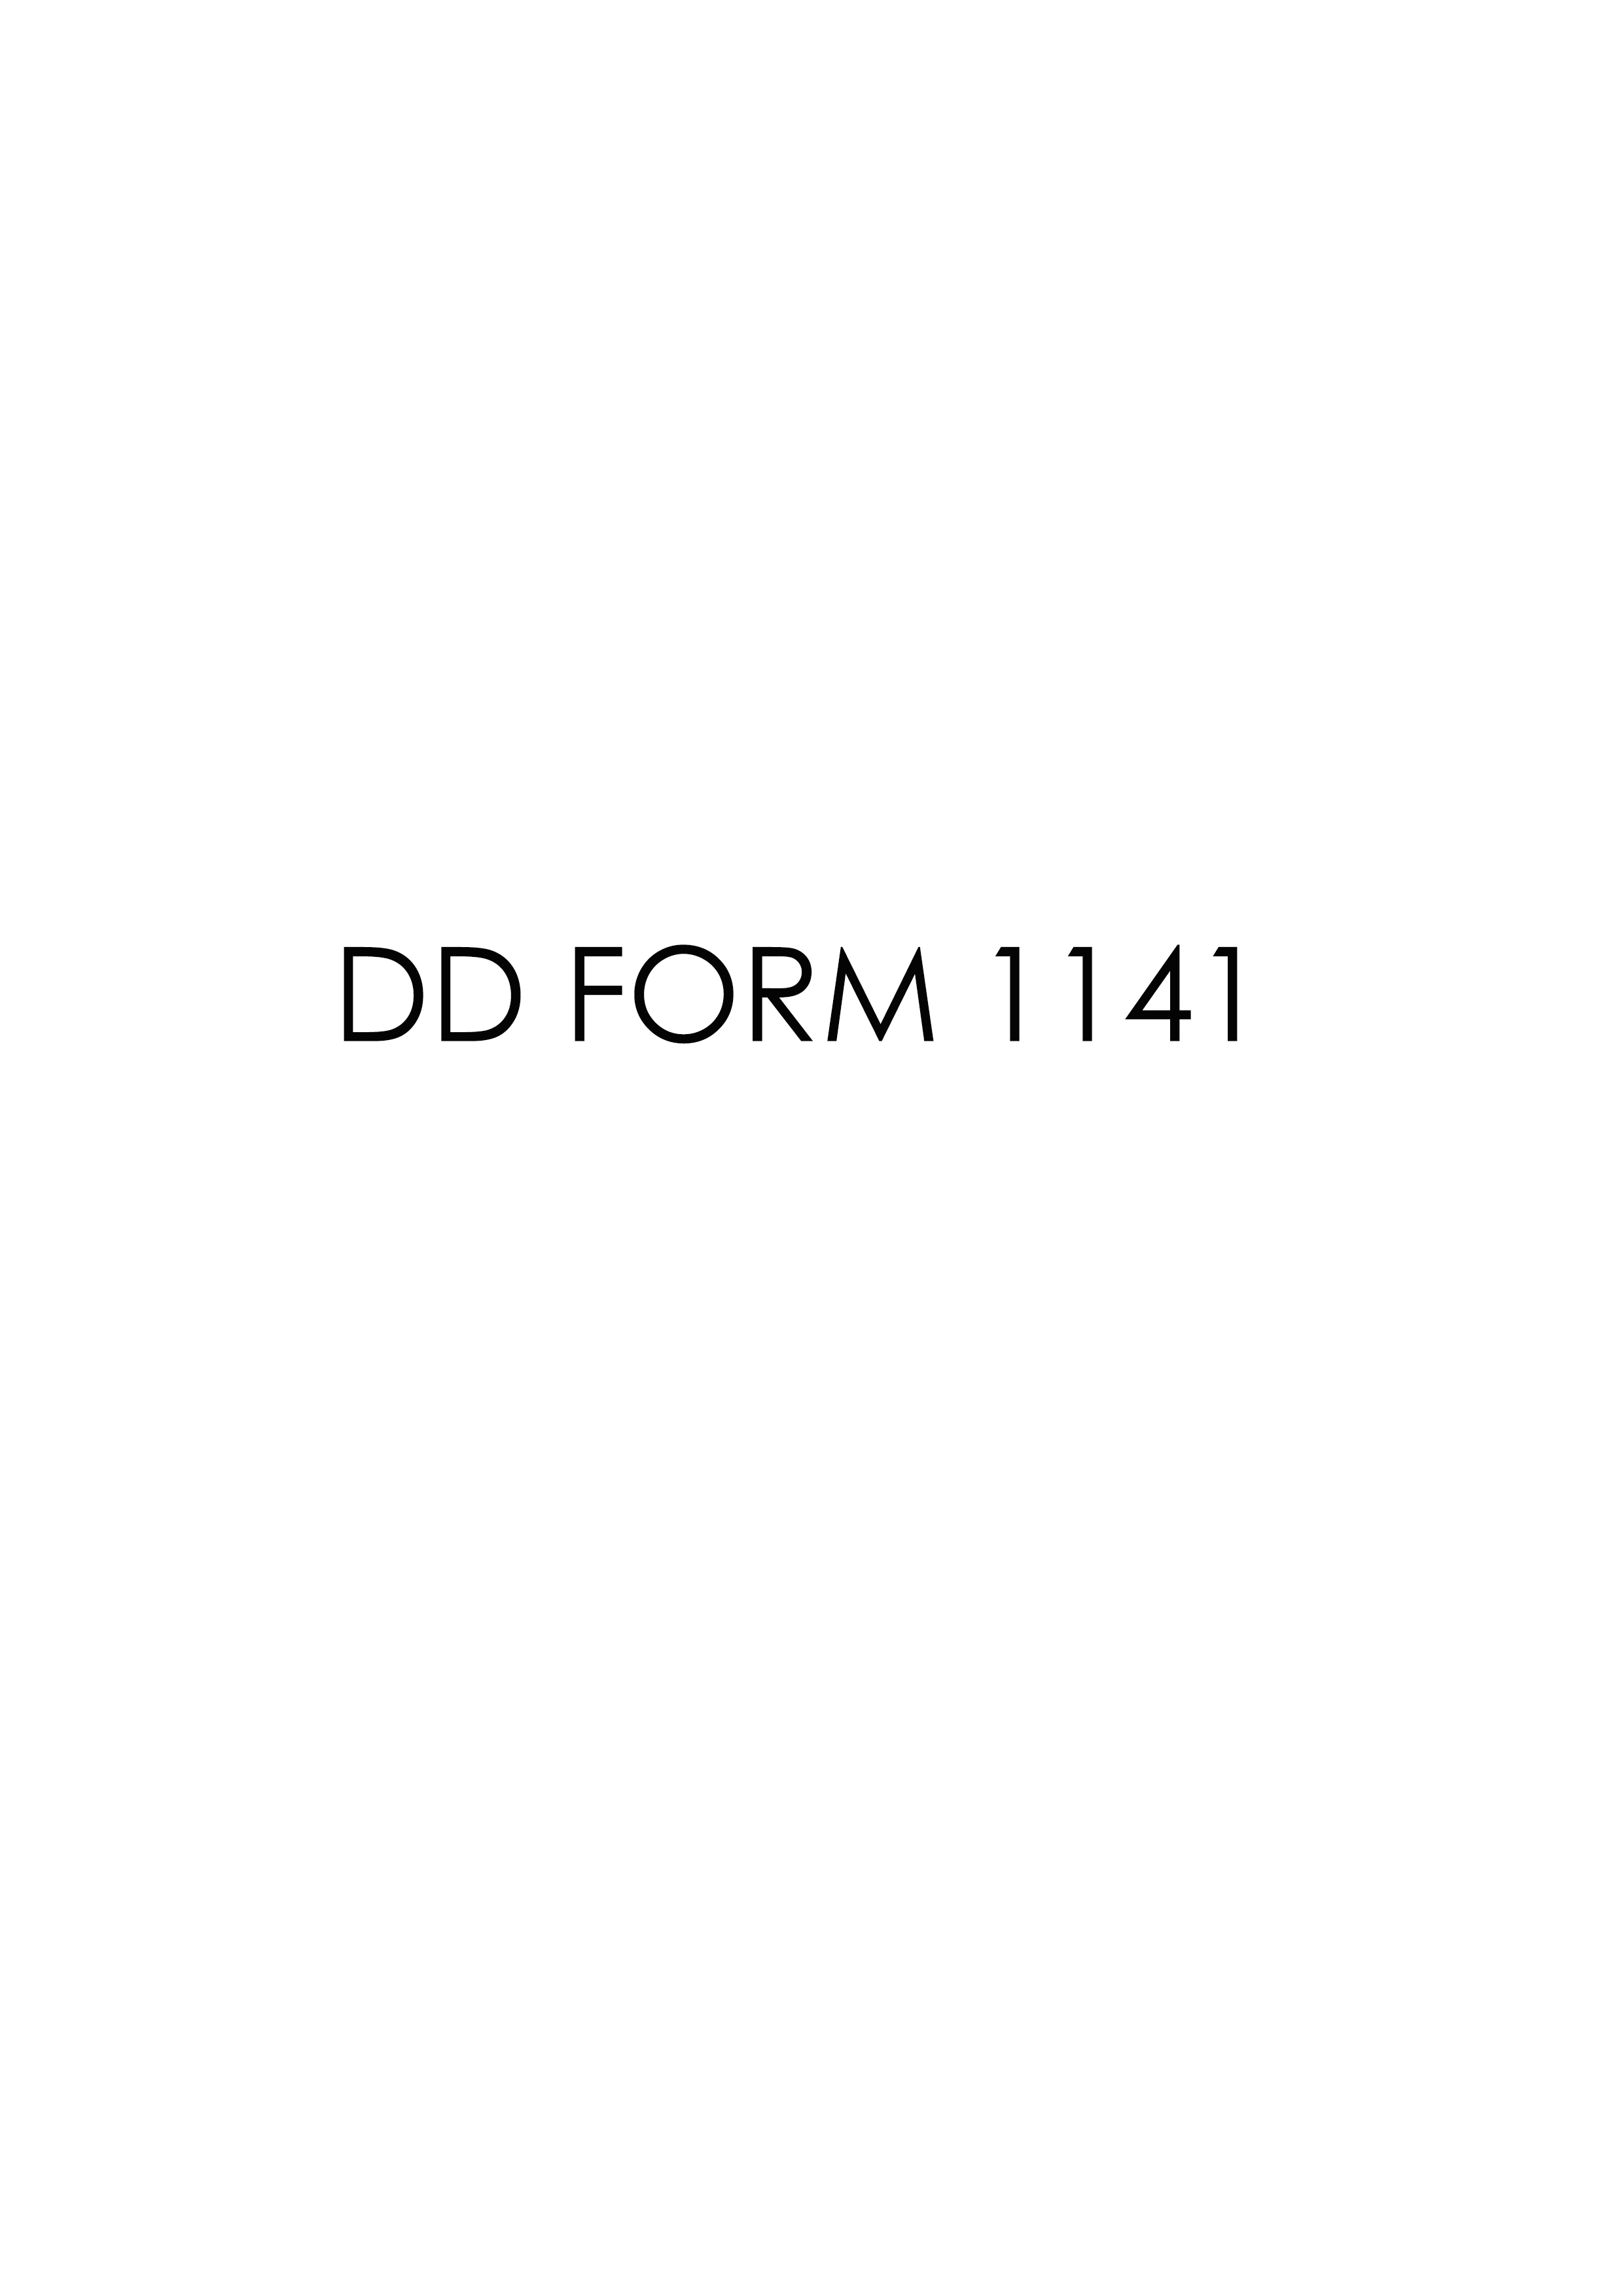 Download Fillable dd Form 1141